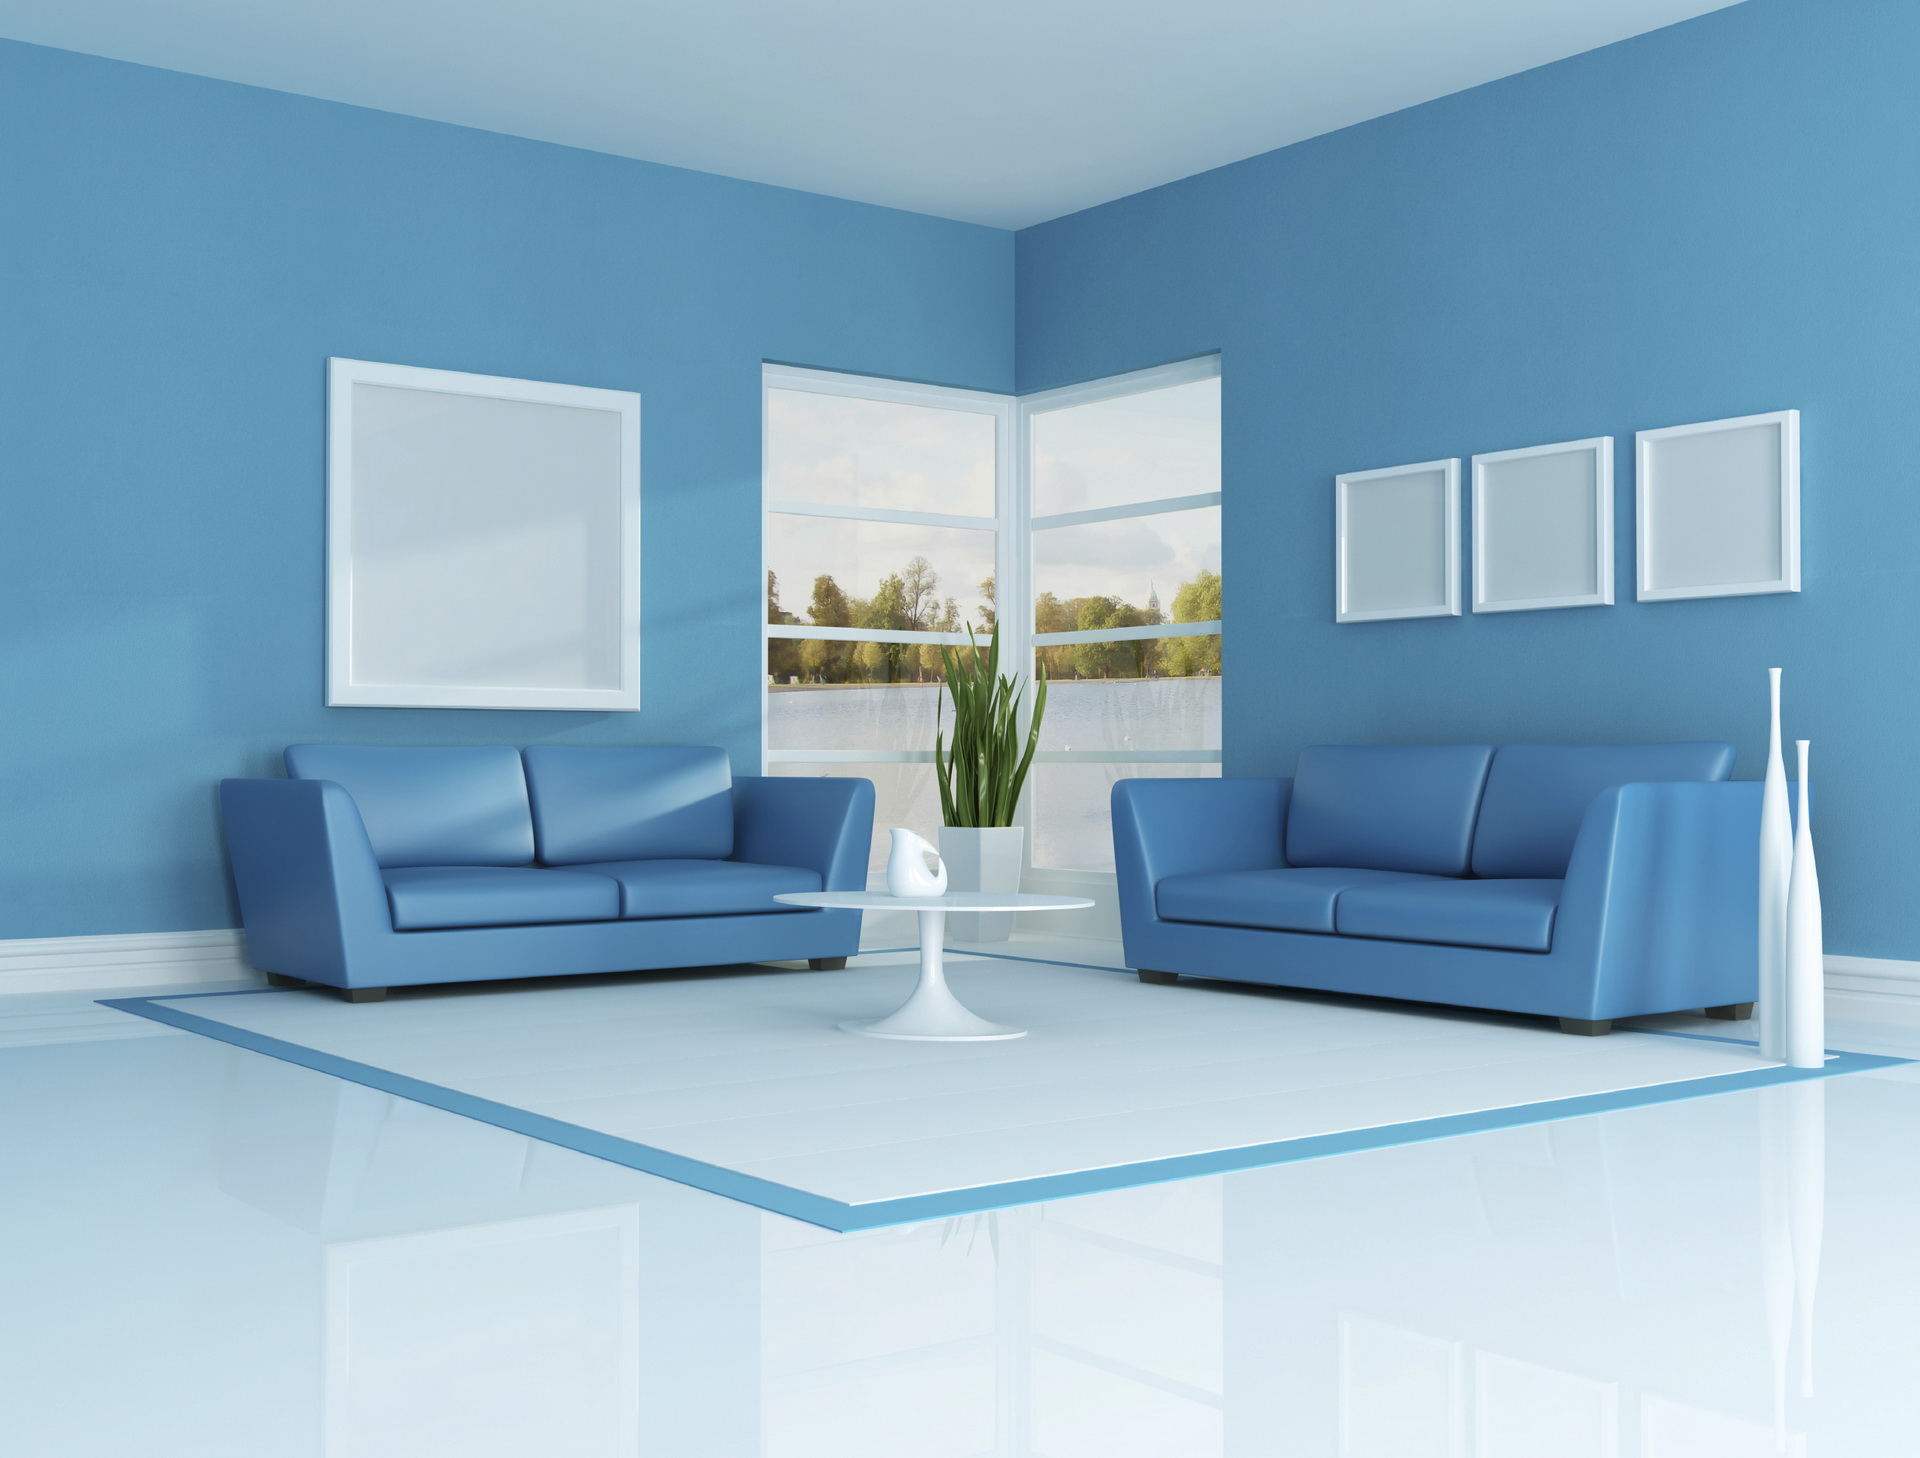 Asian Paints Colour Shades Blue 21 Tips For Wall Painting Home